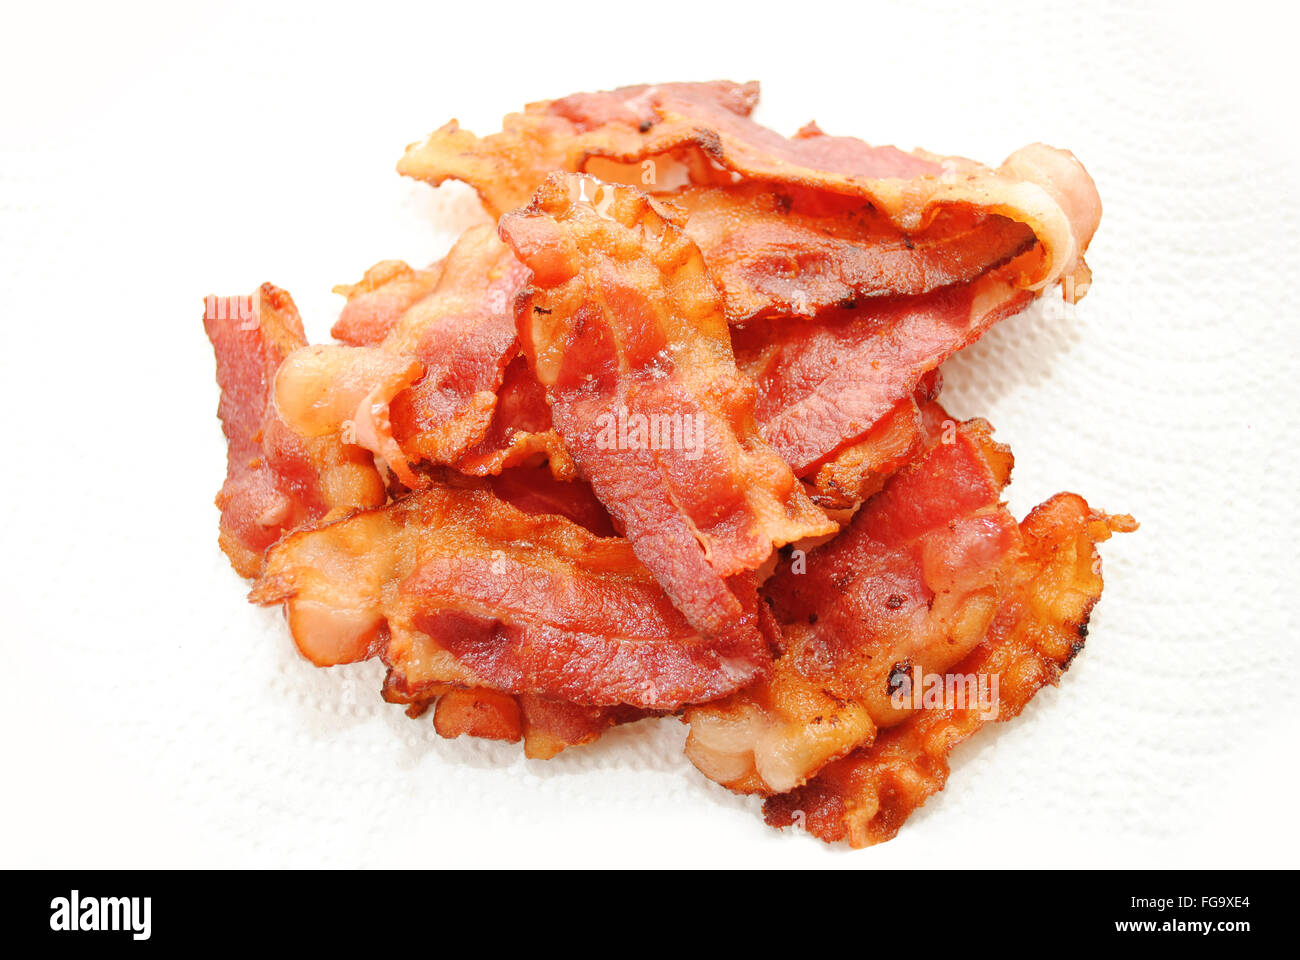 Crispy Fried Bacon Drying on Paper Towel Stock Photo